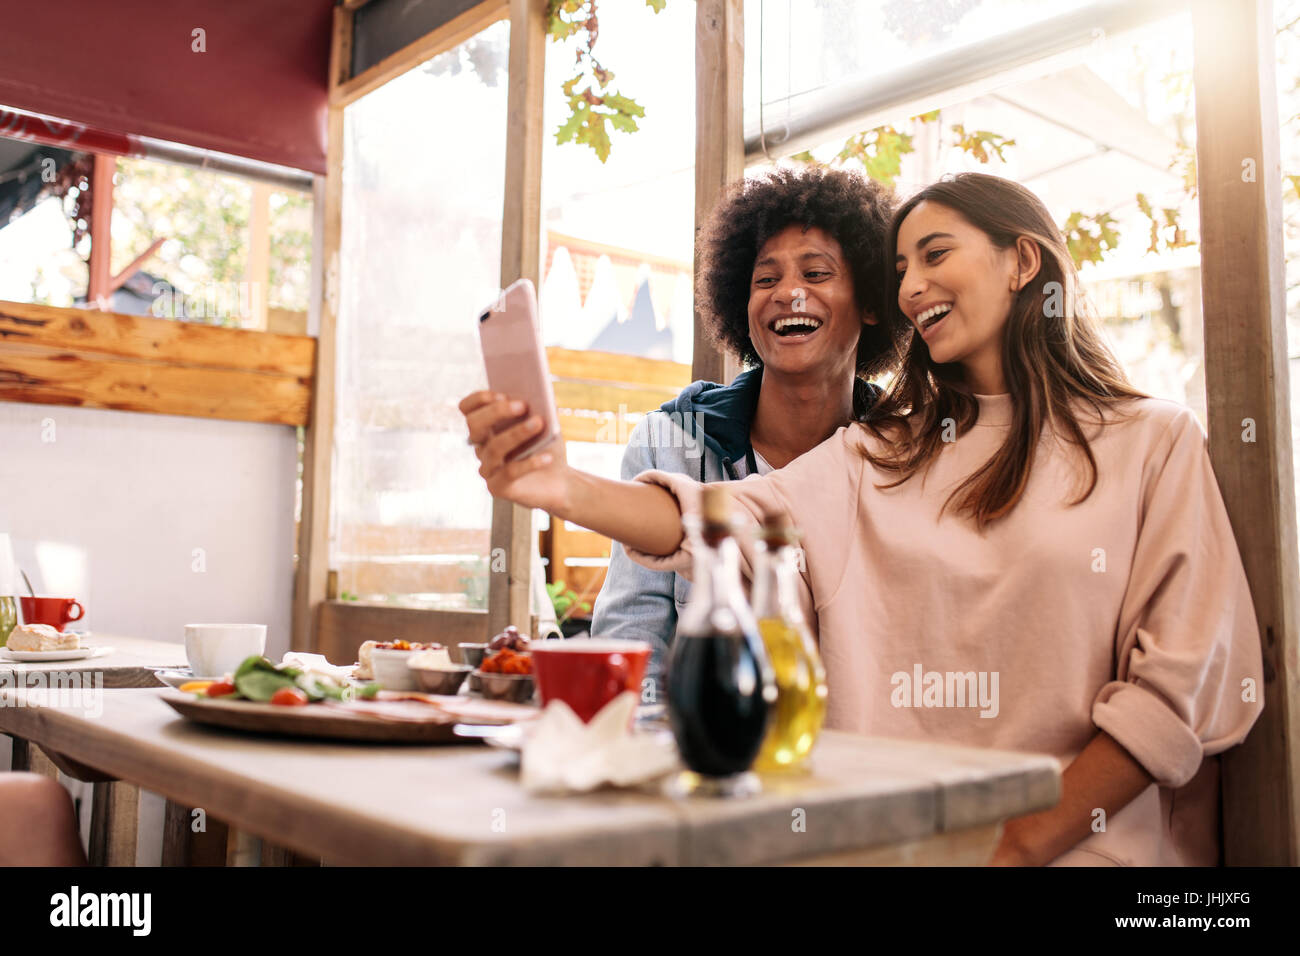 Cheerful woman taking selfie with her friend at cafe. Couple having fun using smartphone at coffee shop Stock Photo